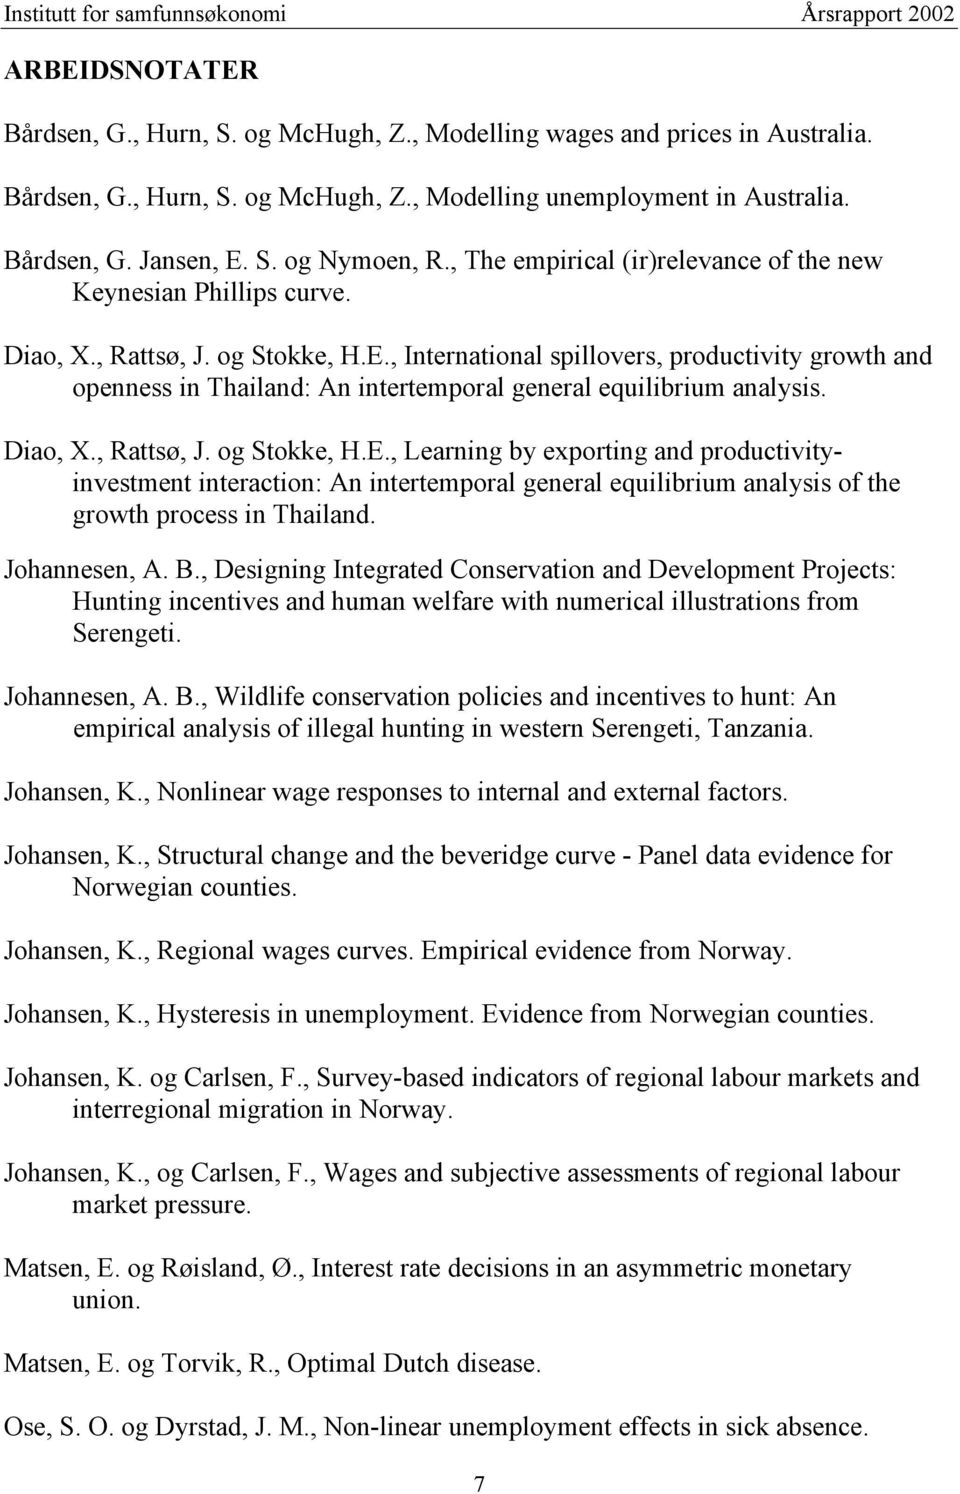 , International spillovers, productivity growth and openness in Thailand: An intertemporal general equilibrium analysis. Diao, X., Rattsø, J. og Stokke, H.E.